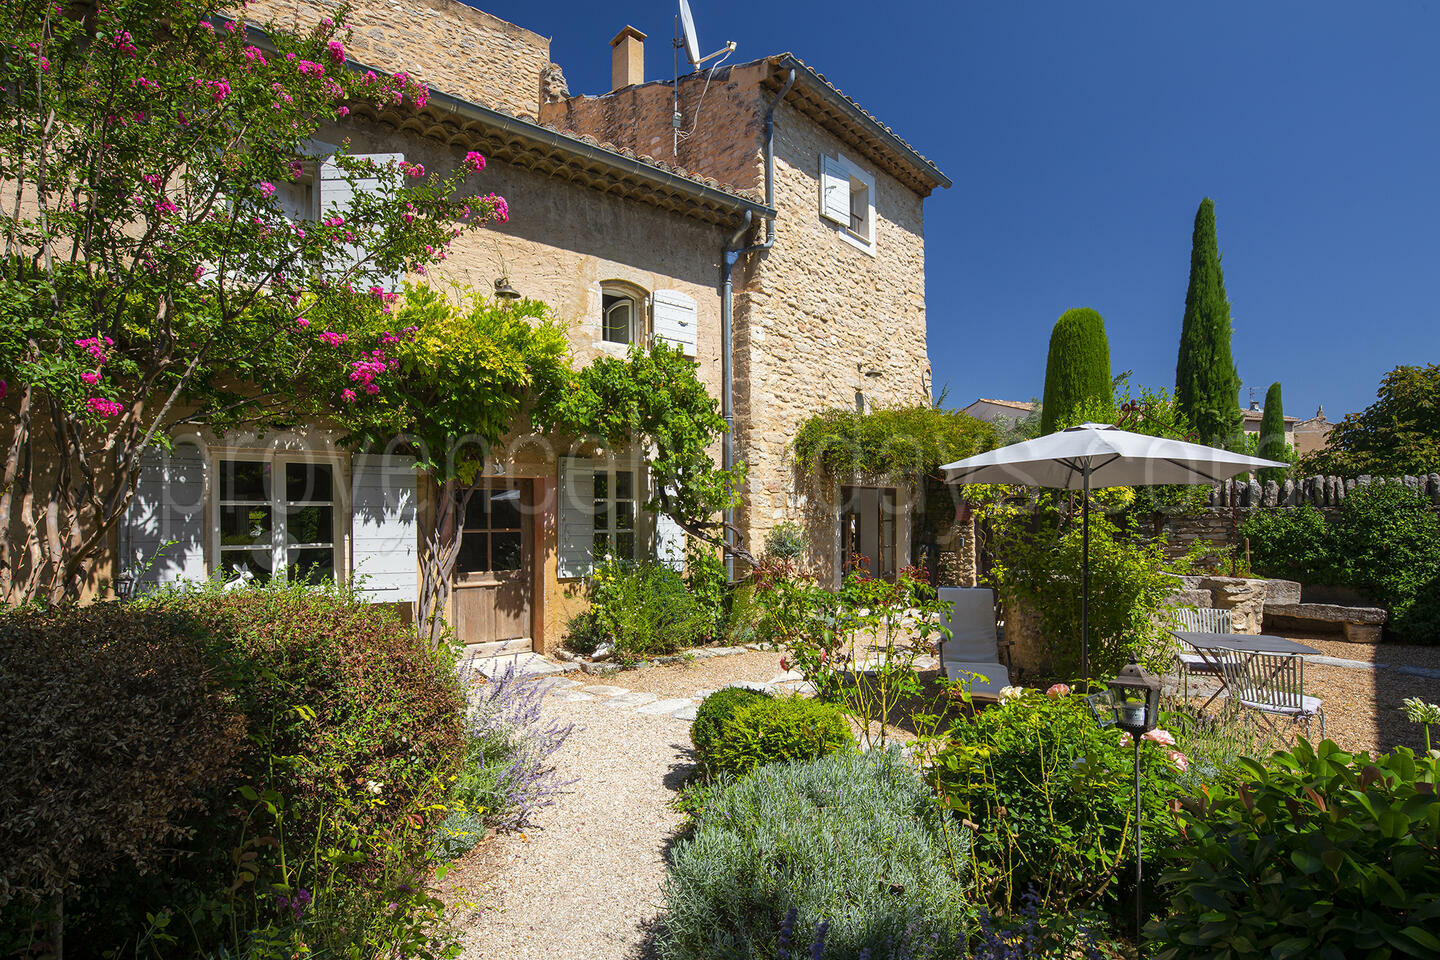 Elegant Farmhouse For Sale in the Heart of the Luberon Mas Cabrières: Exterior - 1